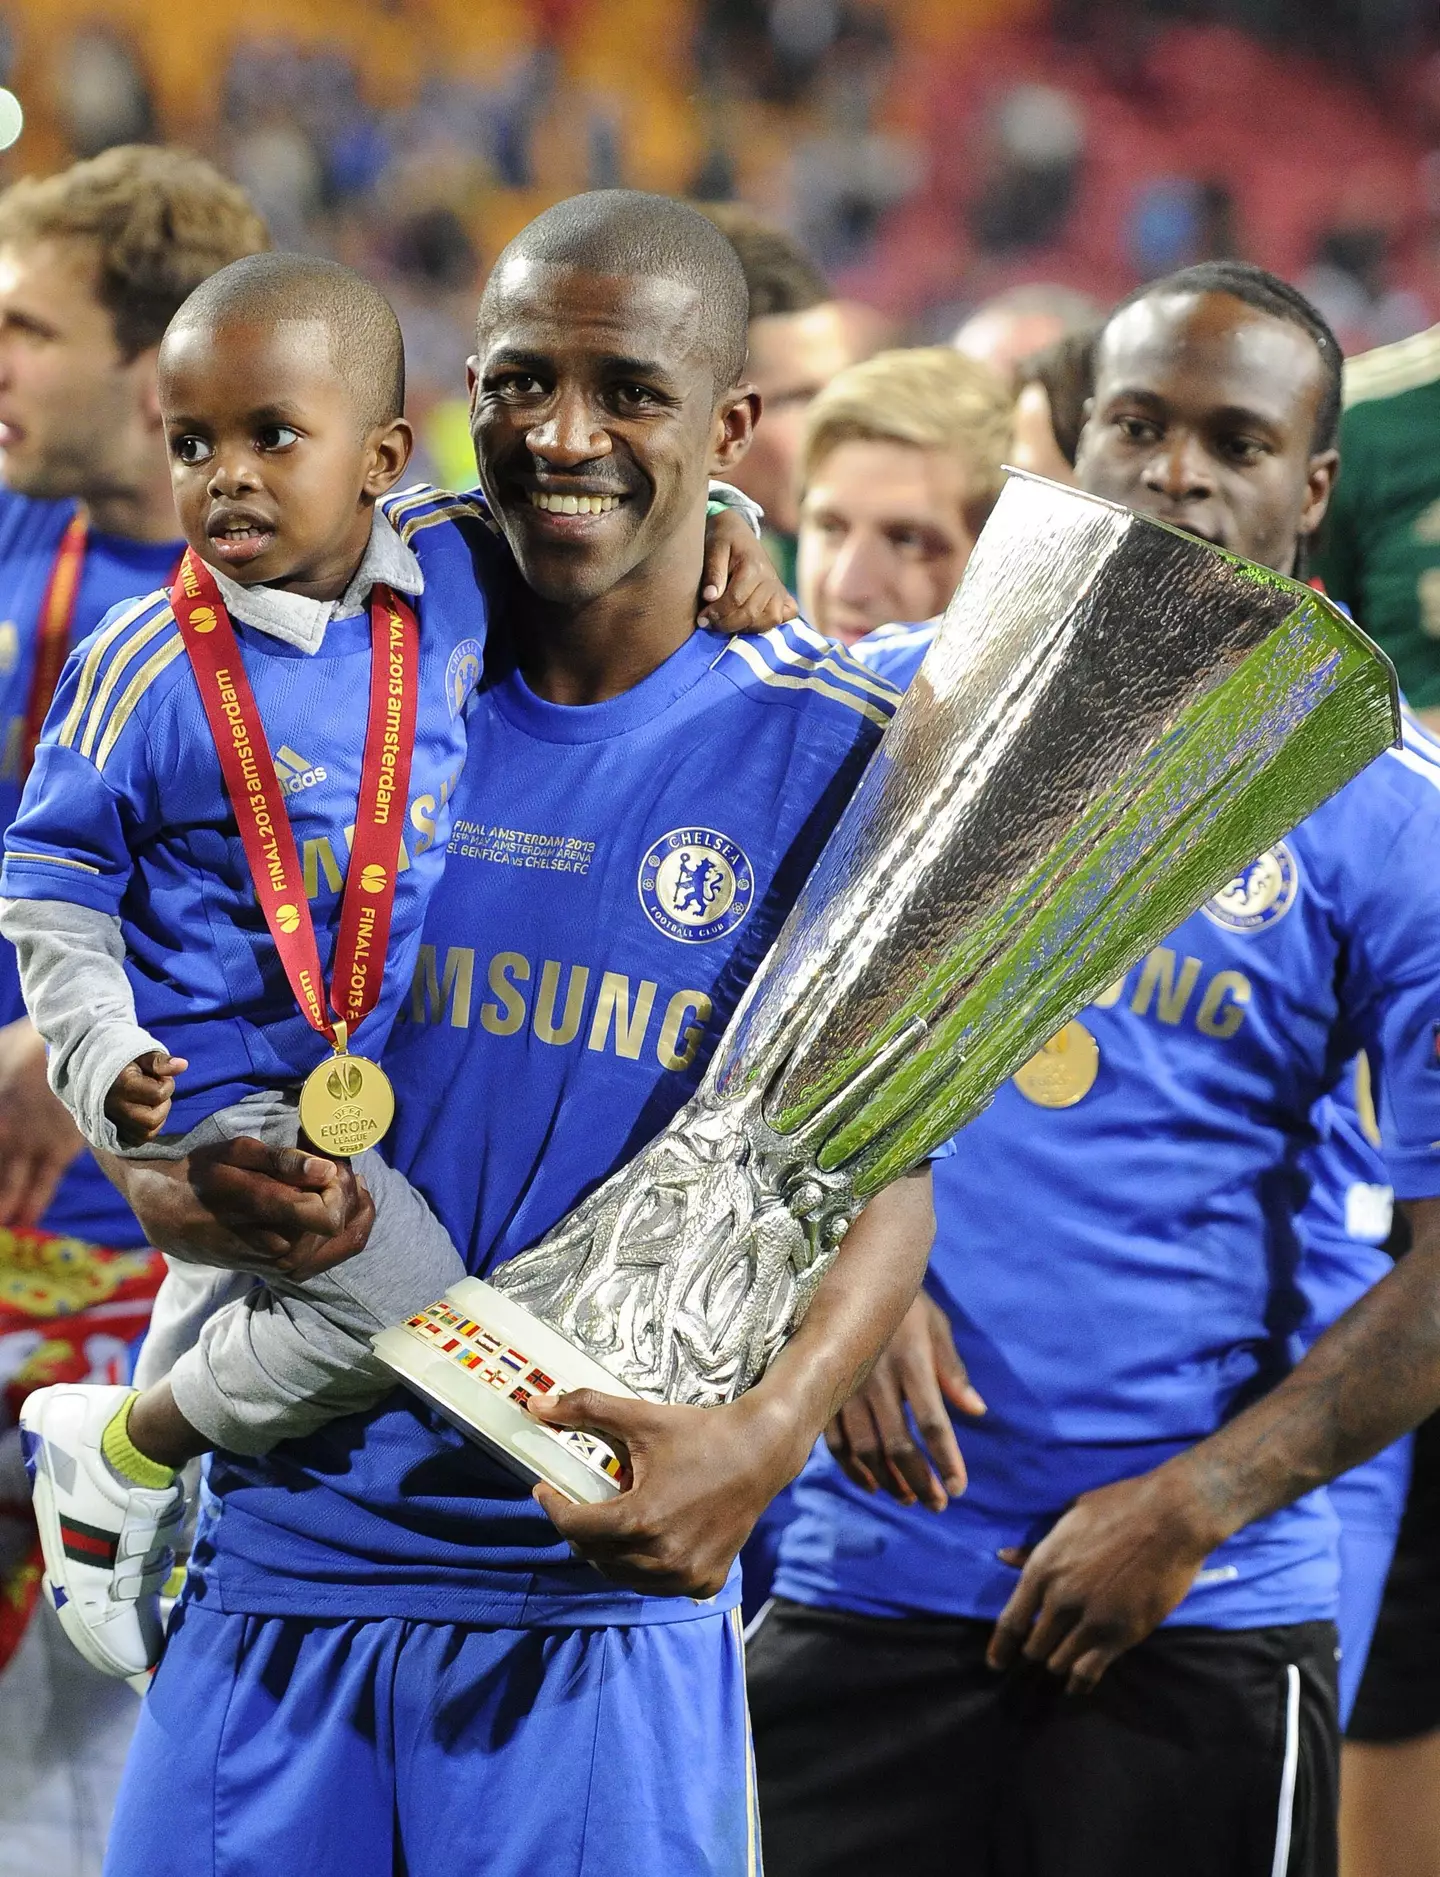 Ramires was also part of the 2012/13 Europa League winning team at Chelsea. Image credit: Alamy